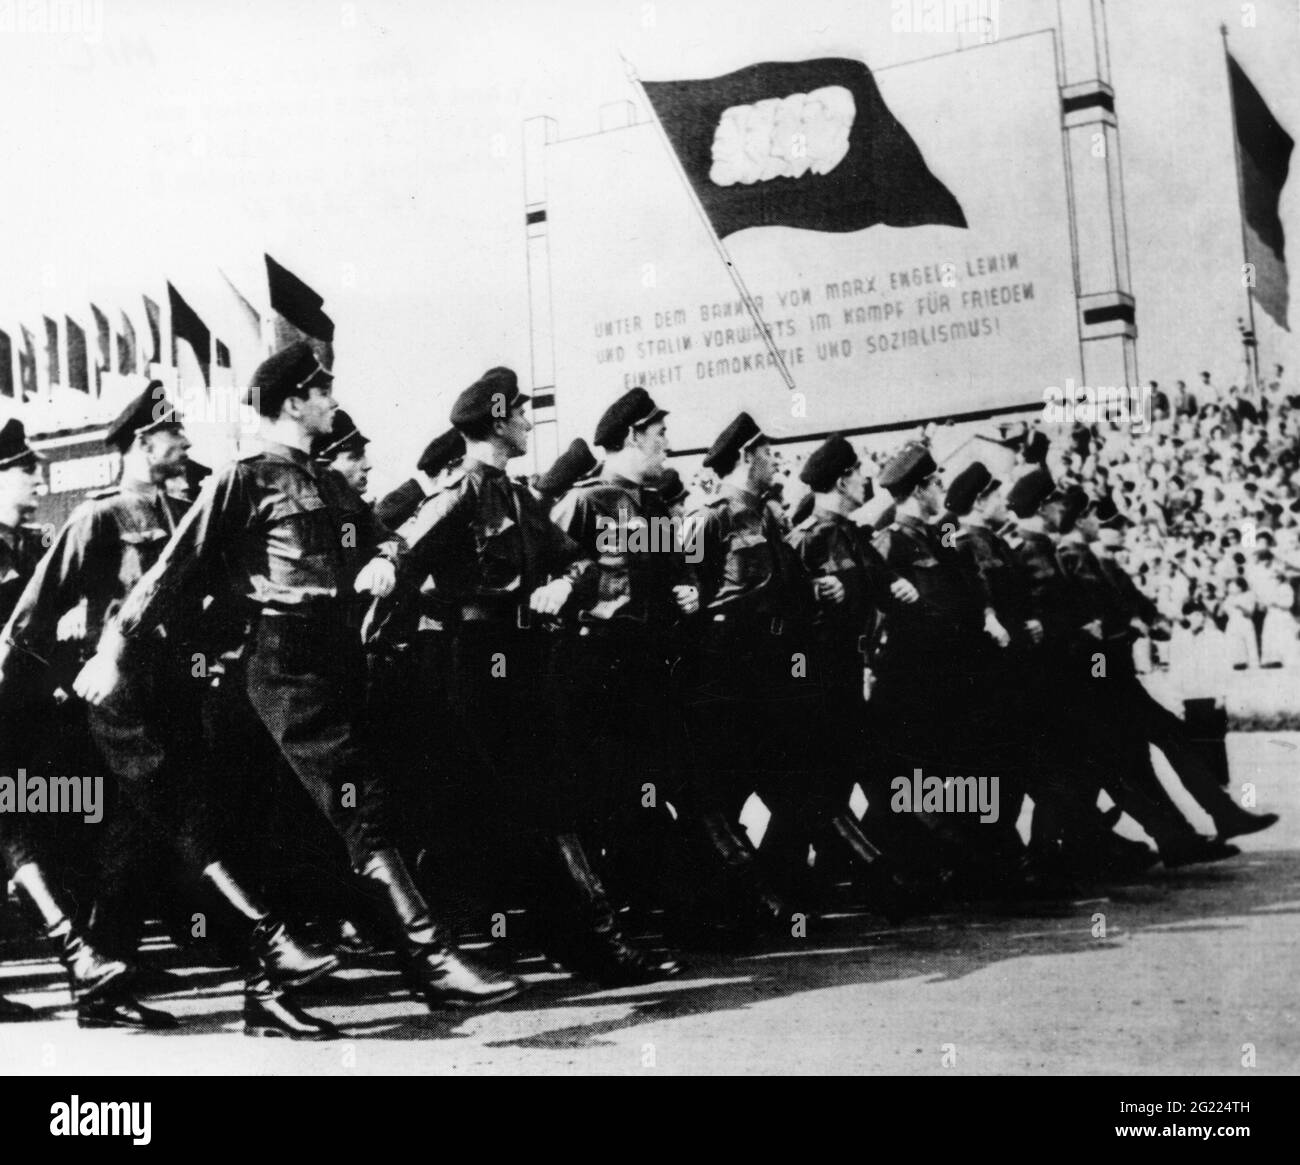 Polizei, Volkspolizei, Parade, DDR, um 1955, ADDITIONAL-RIGHTS-CLEARANCE-INFO-NOT-AVAILABLE Stockfoto